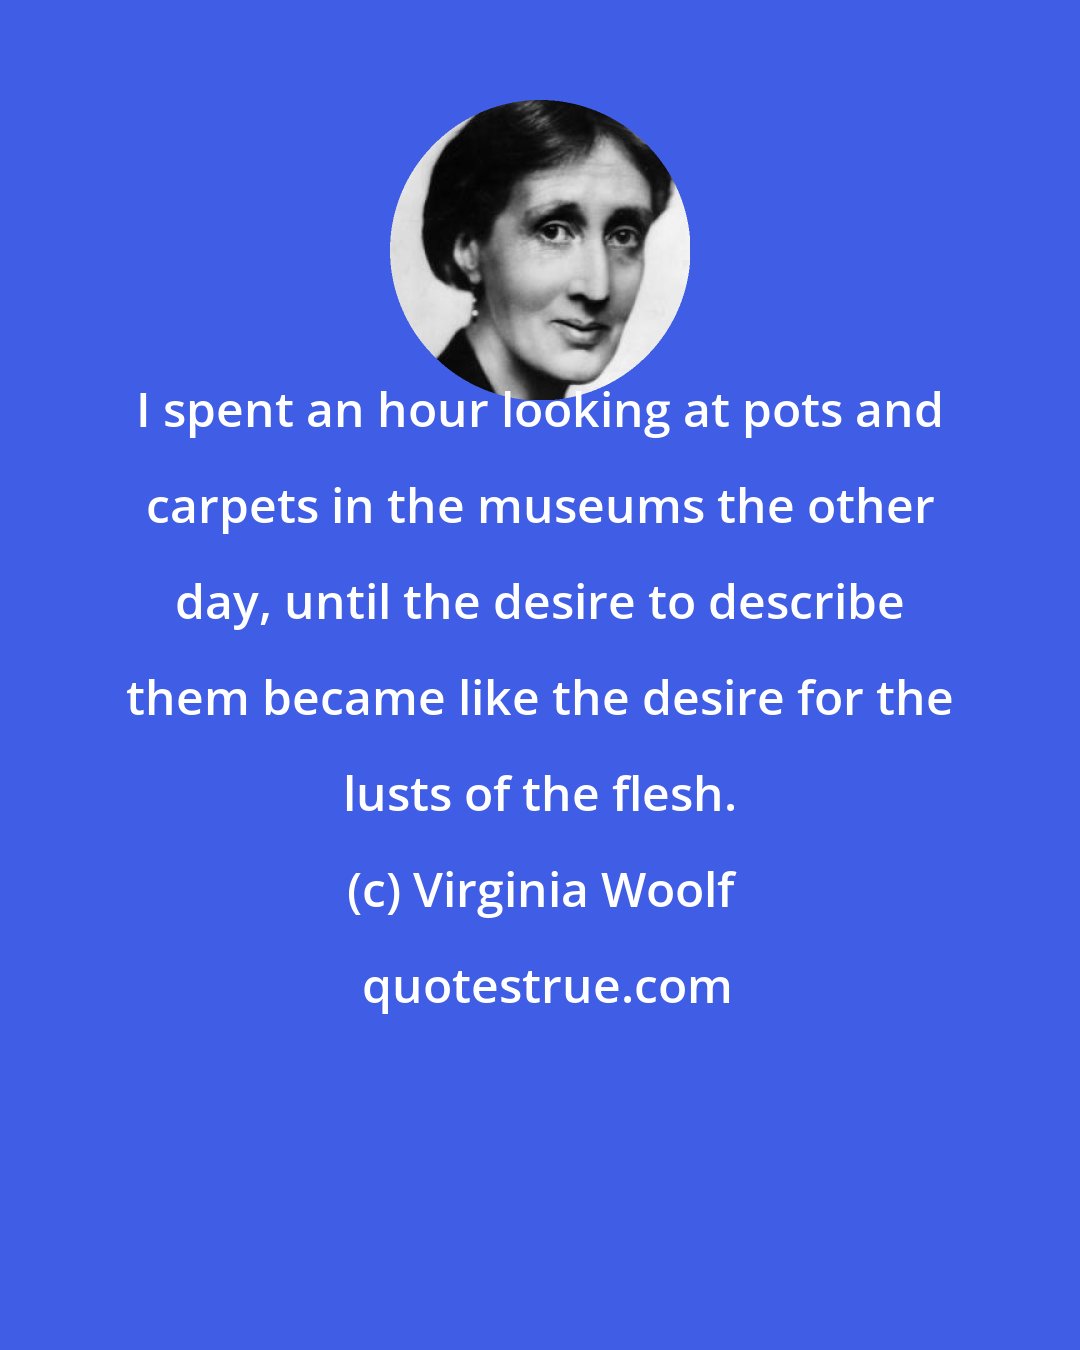 Virginia Woolf: I spent an hour looking at pots and carpets in the museums the other day, until the desire to describe them became like the desire for the lusts of the flesh.